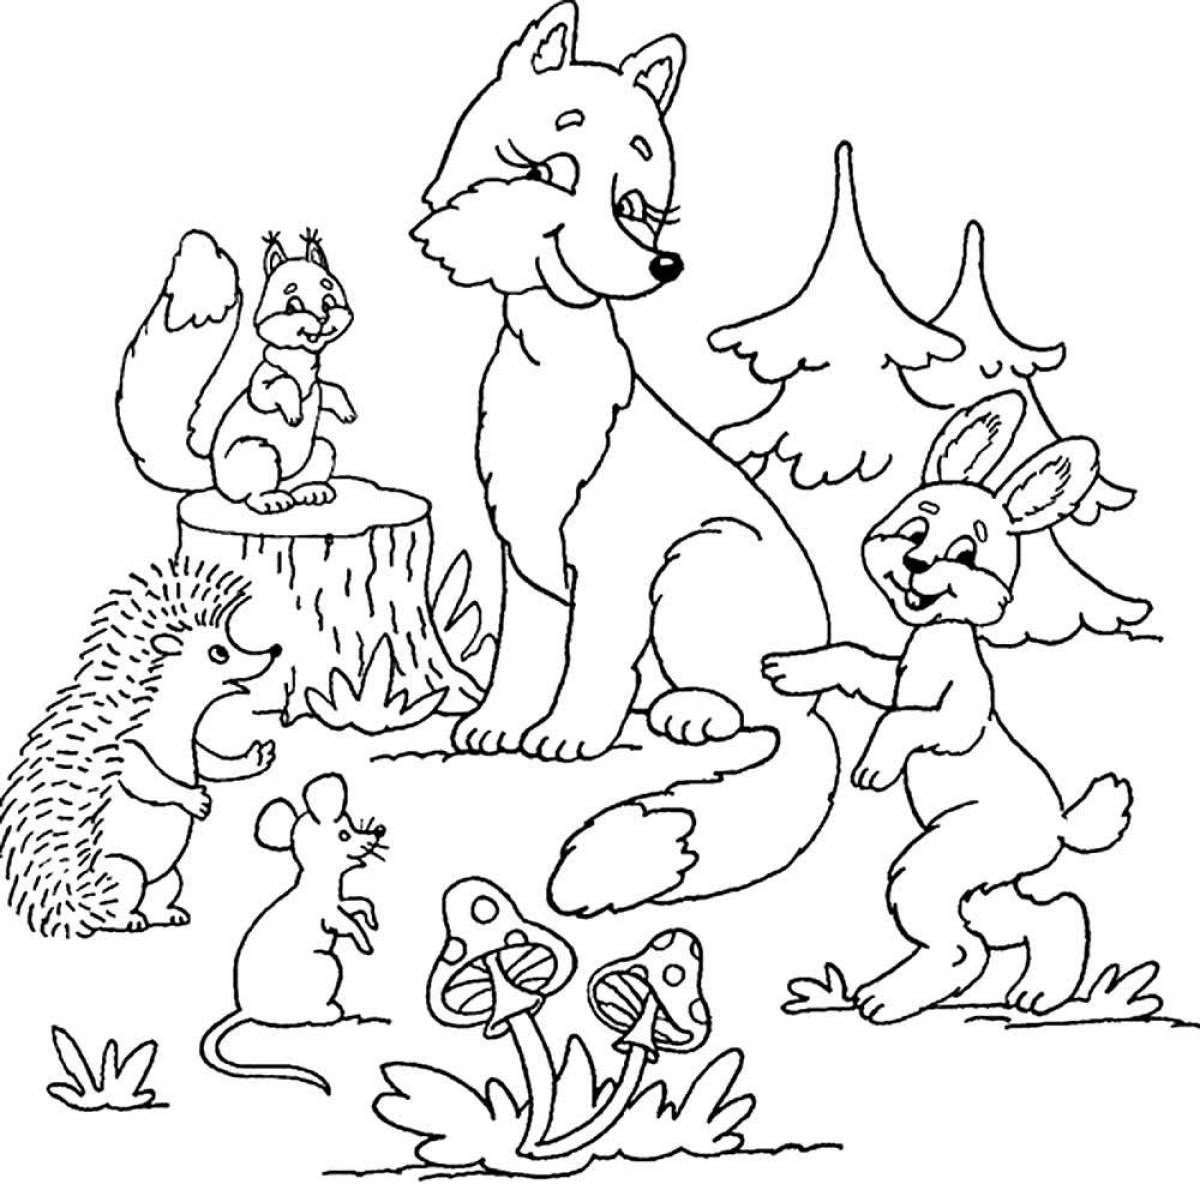 Colour coloring pages animals for children 5-7 years old